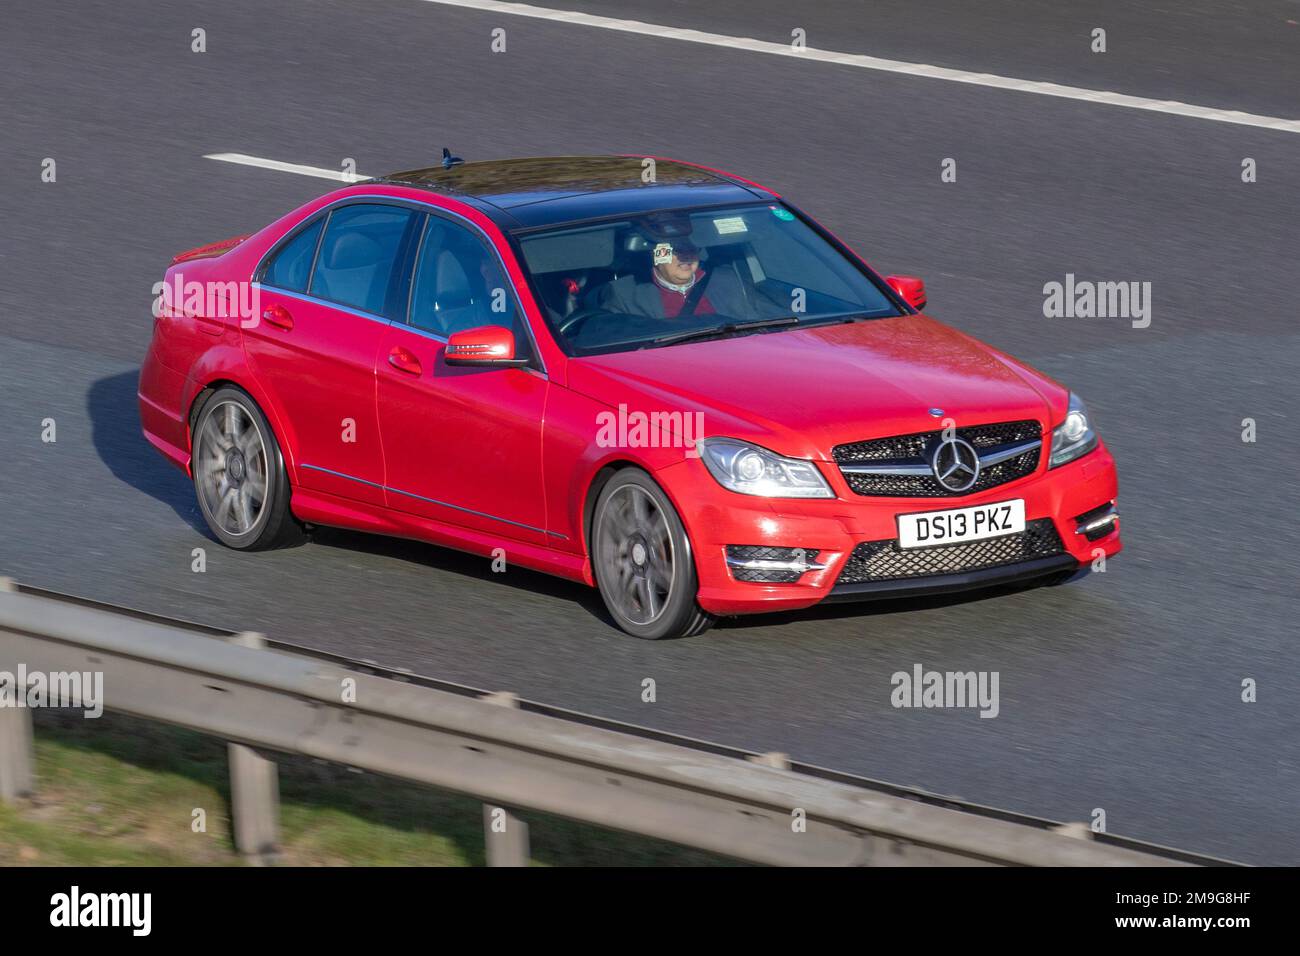 2013 Red Mercedes Benz C C250 BLUEEFFICIENCY AMG SPORT PLUS 2143 cc 7 speed manual; travelling on the M61 motorway, UK Stock Photo